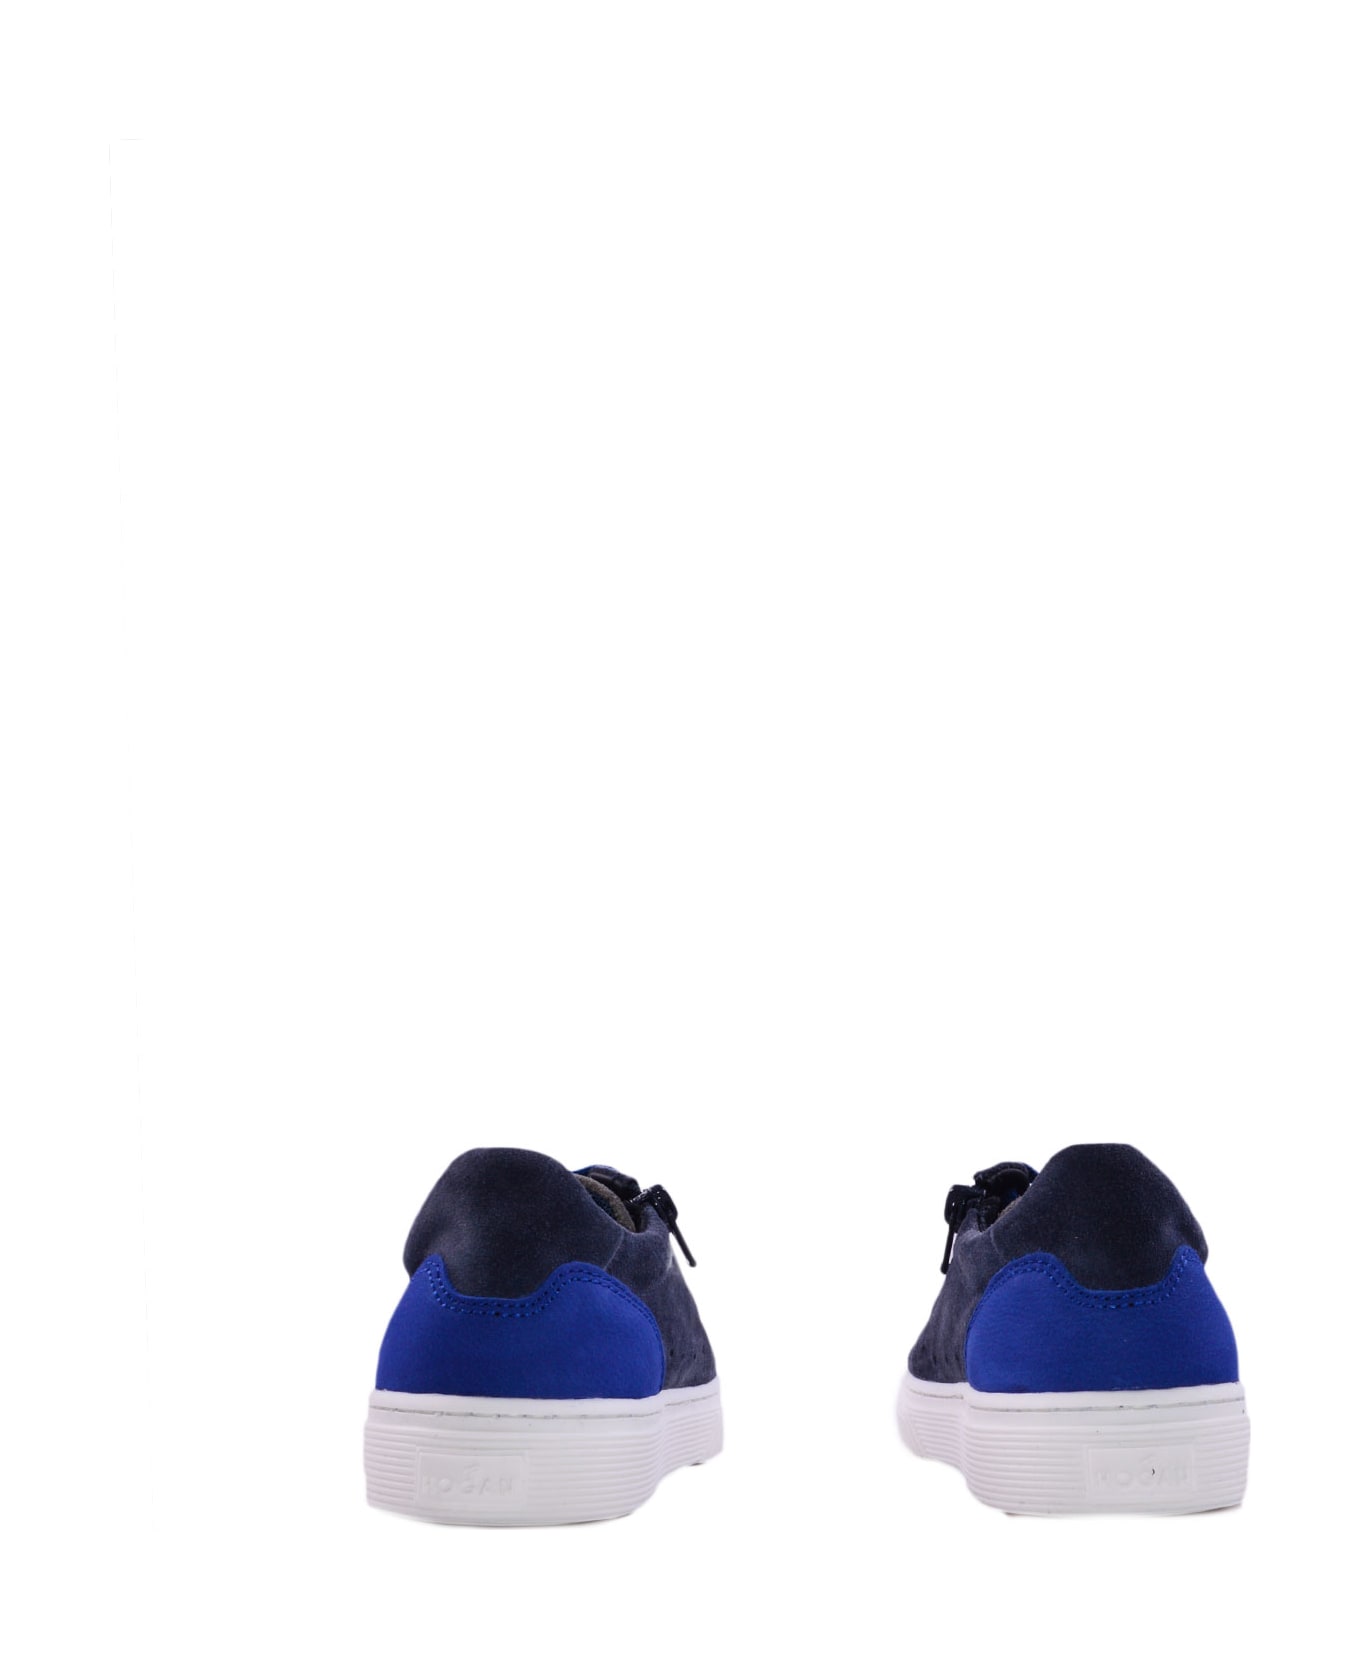 Hogan H365 Sneakers In Suede Leather - Blue シューズ